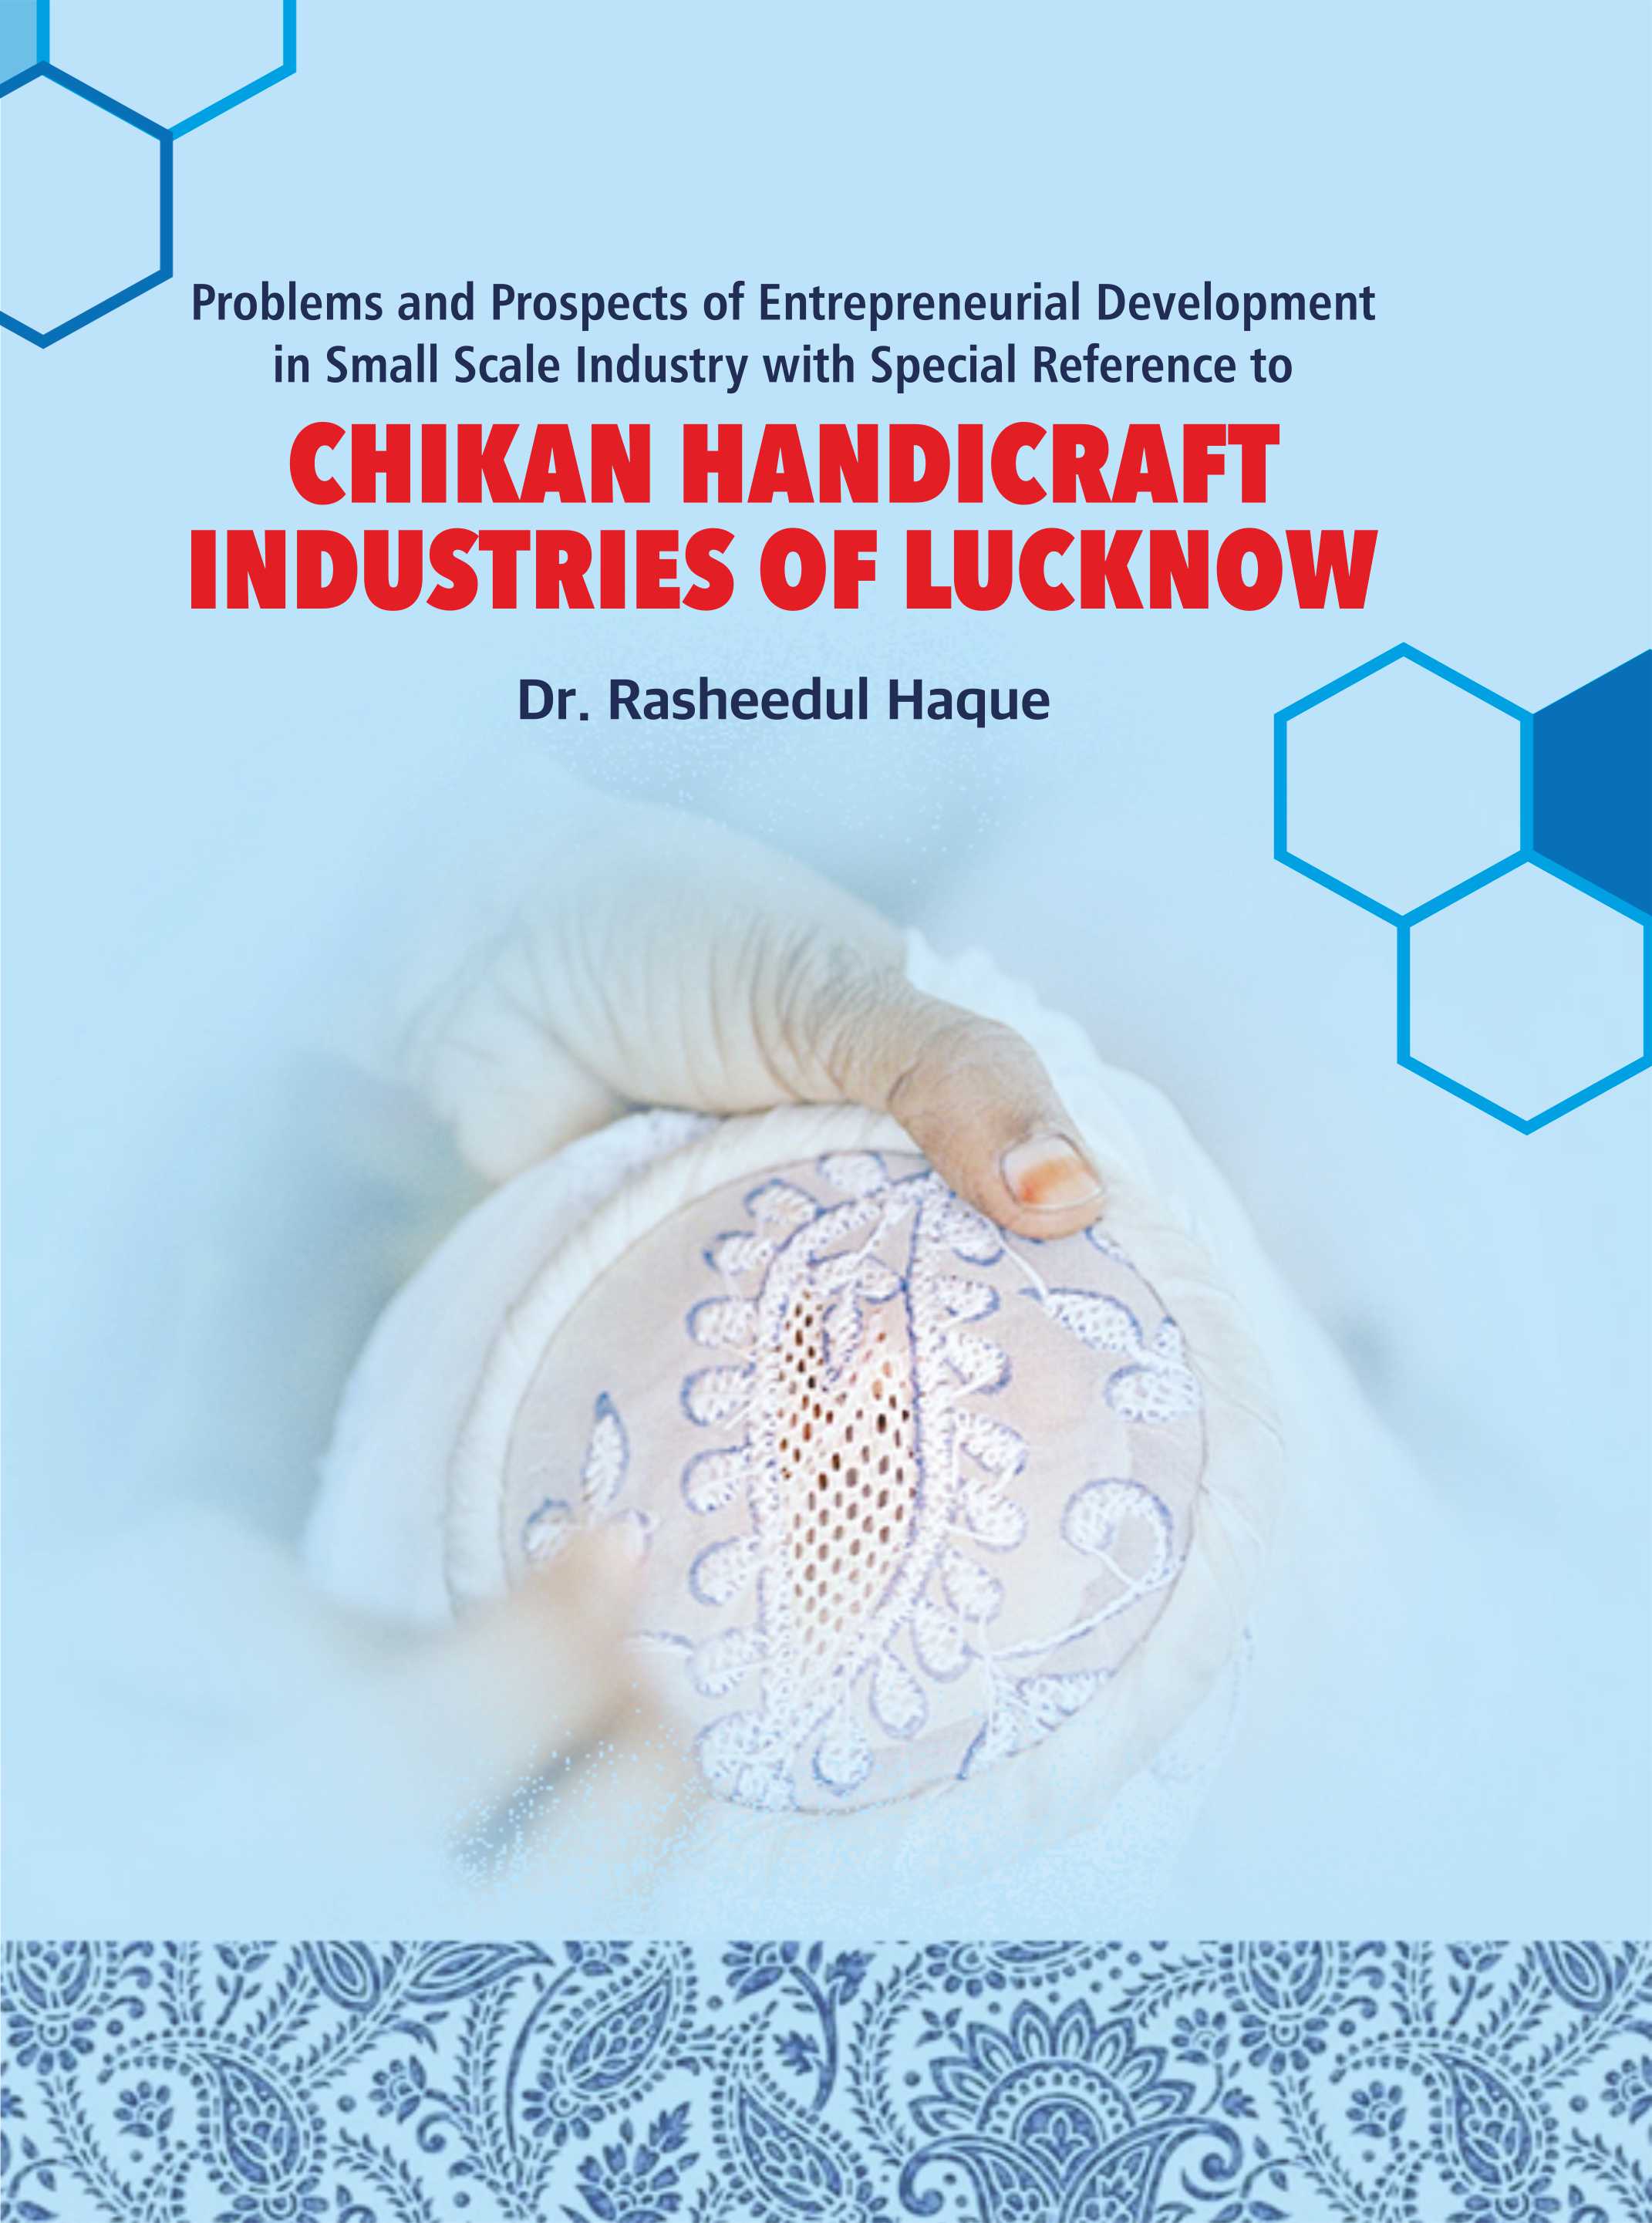 Problems and Prospects of Entrepreneurial Development in Small Scale Industry With Special Reference to Chikan Handicraft Industries of Lucknow